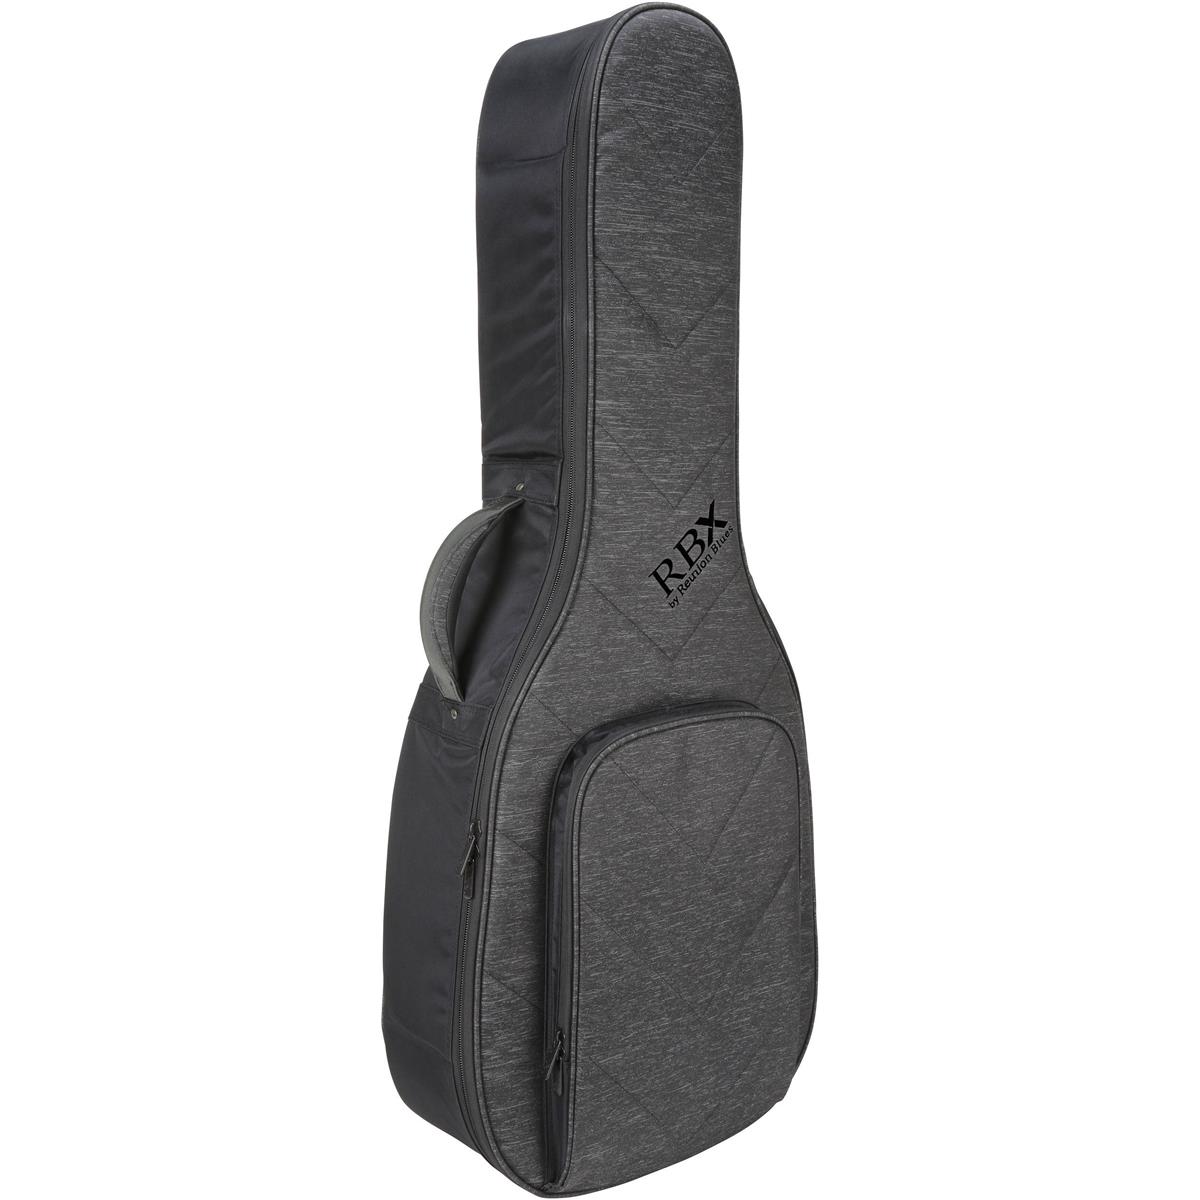 Image of Reunion Blues RBX Oxford Series Gig Bag for Small Body Acoustic/Classical Guitar